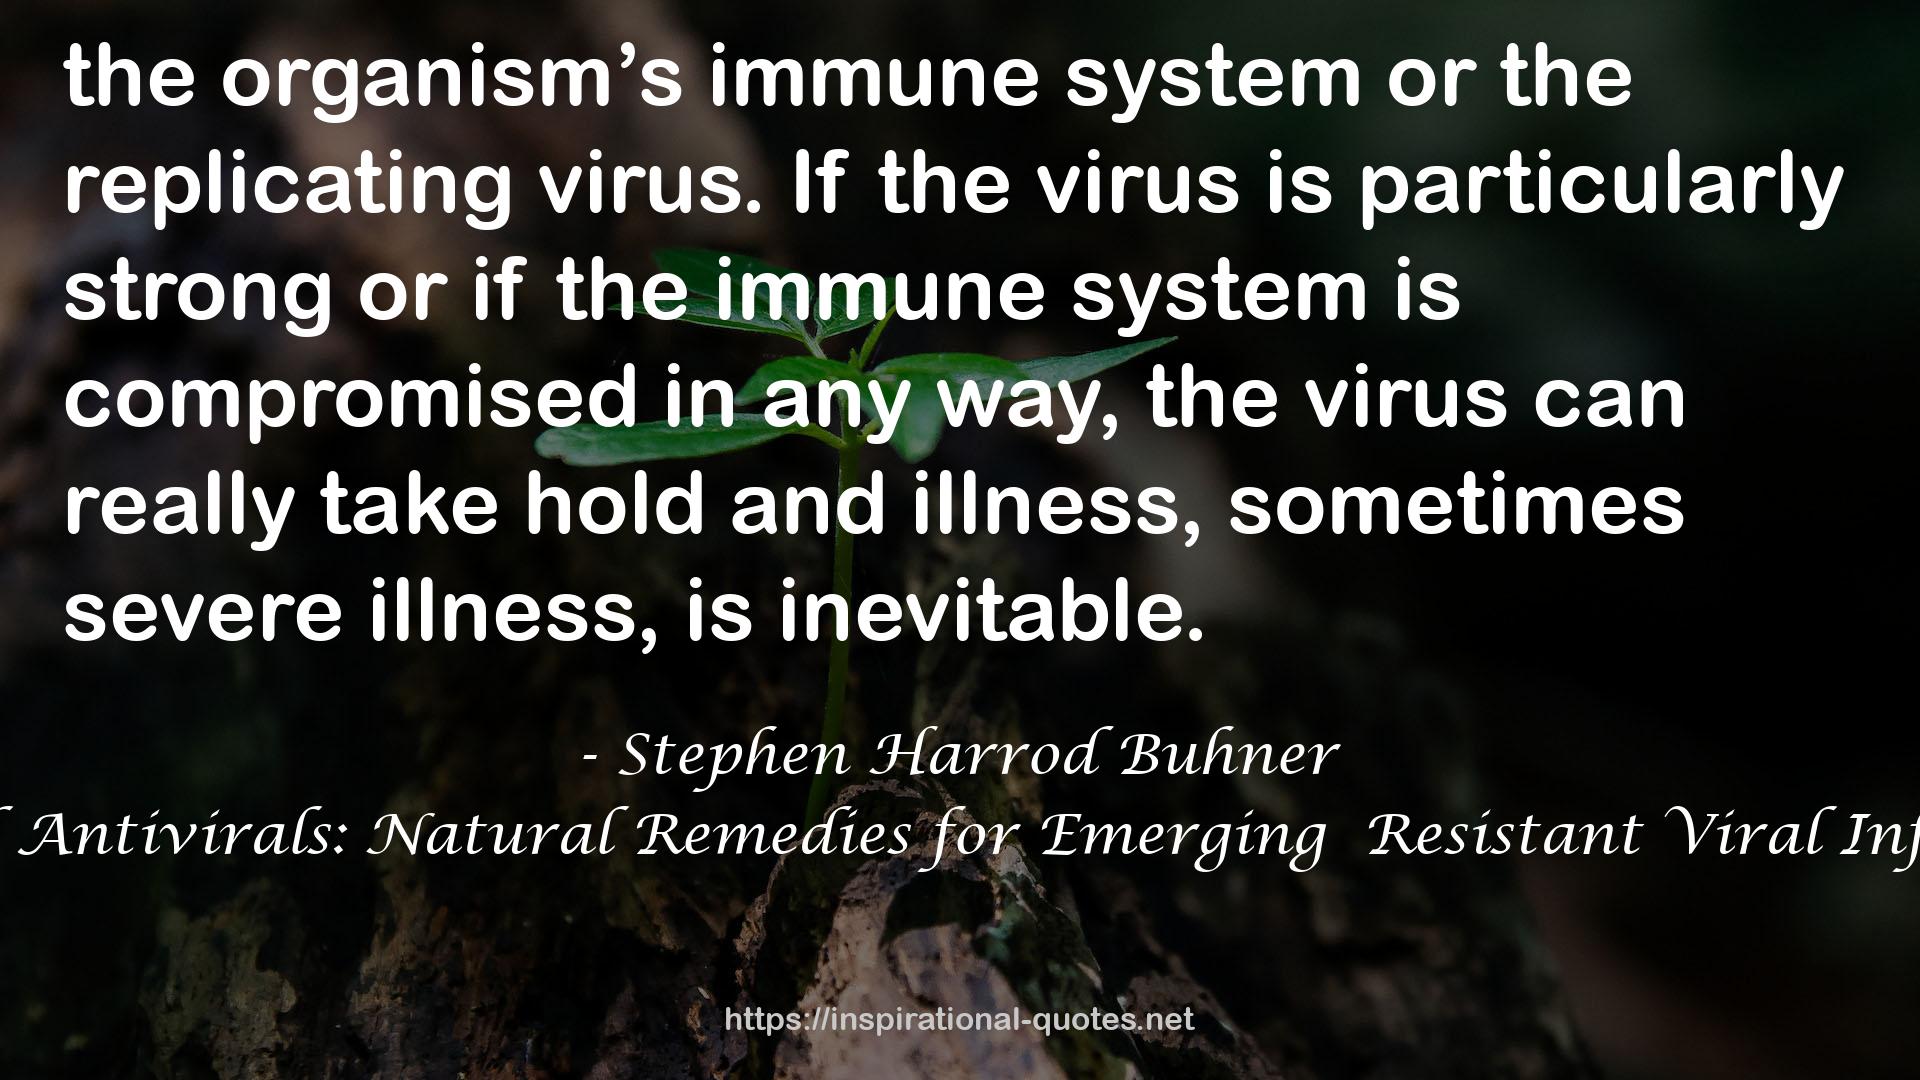 Herbal Antivirals: Natural Remedies for Emerging  Resistant Viral Infections QUOTES